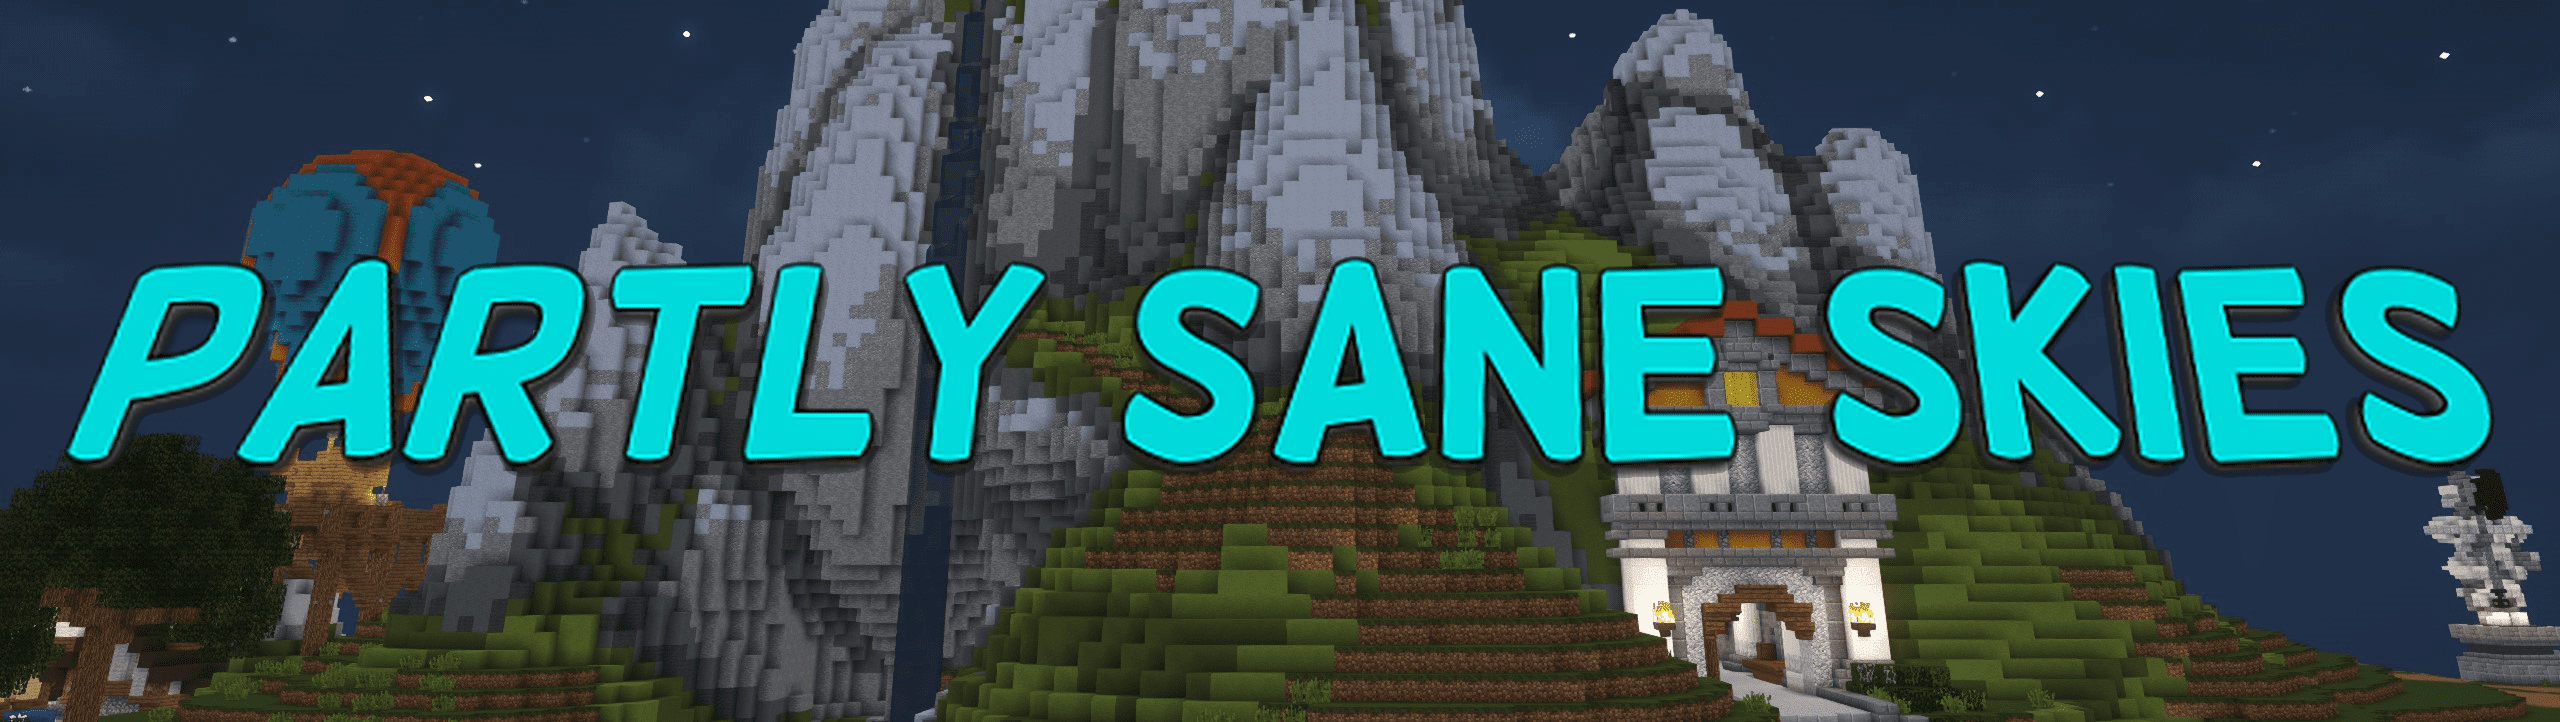 Partly Sane Skies Mod (1.8.9) - Quality of Life for Skyblock 1